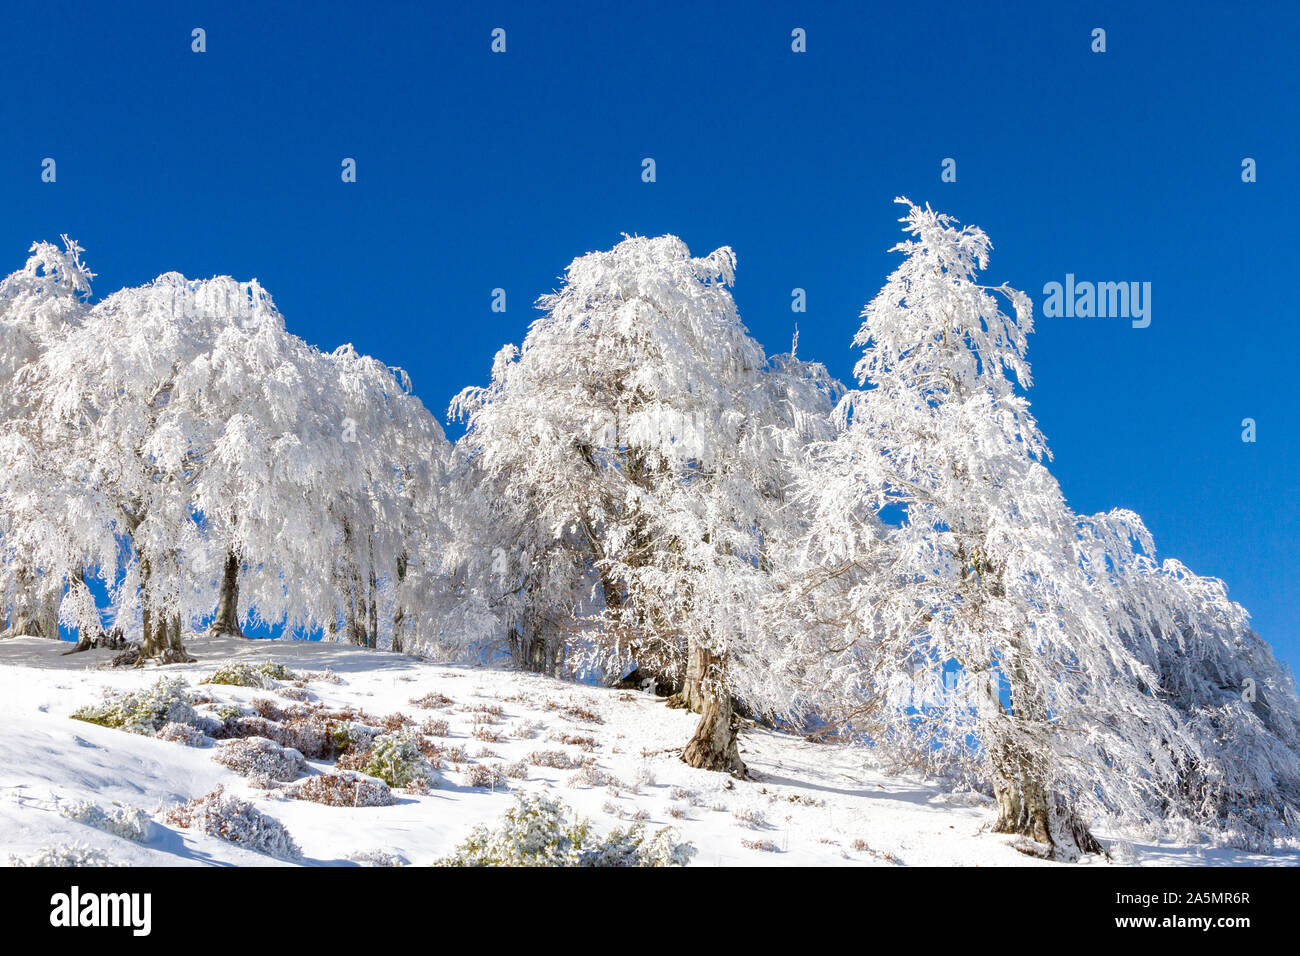 Greece, winter time full of snow in Grevena region, at the mountrains of Pindos, near villages of Smixi, Vasilitsa and Samarina. Stock Photo